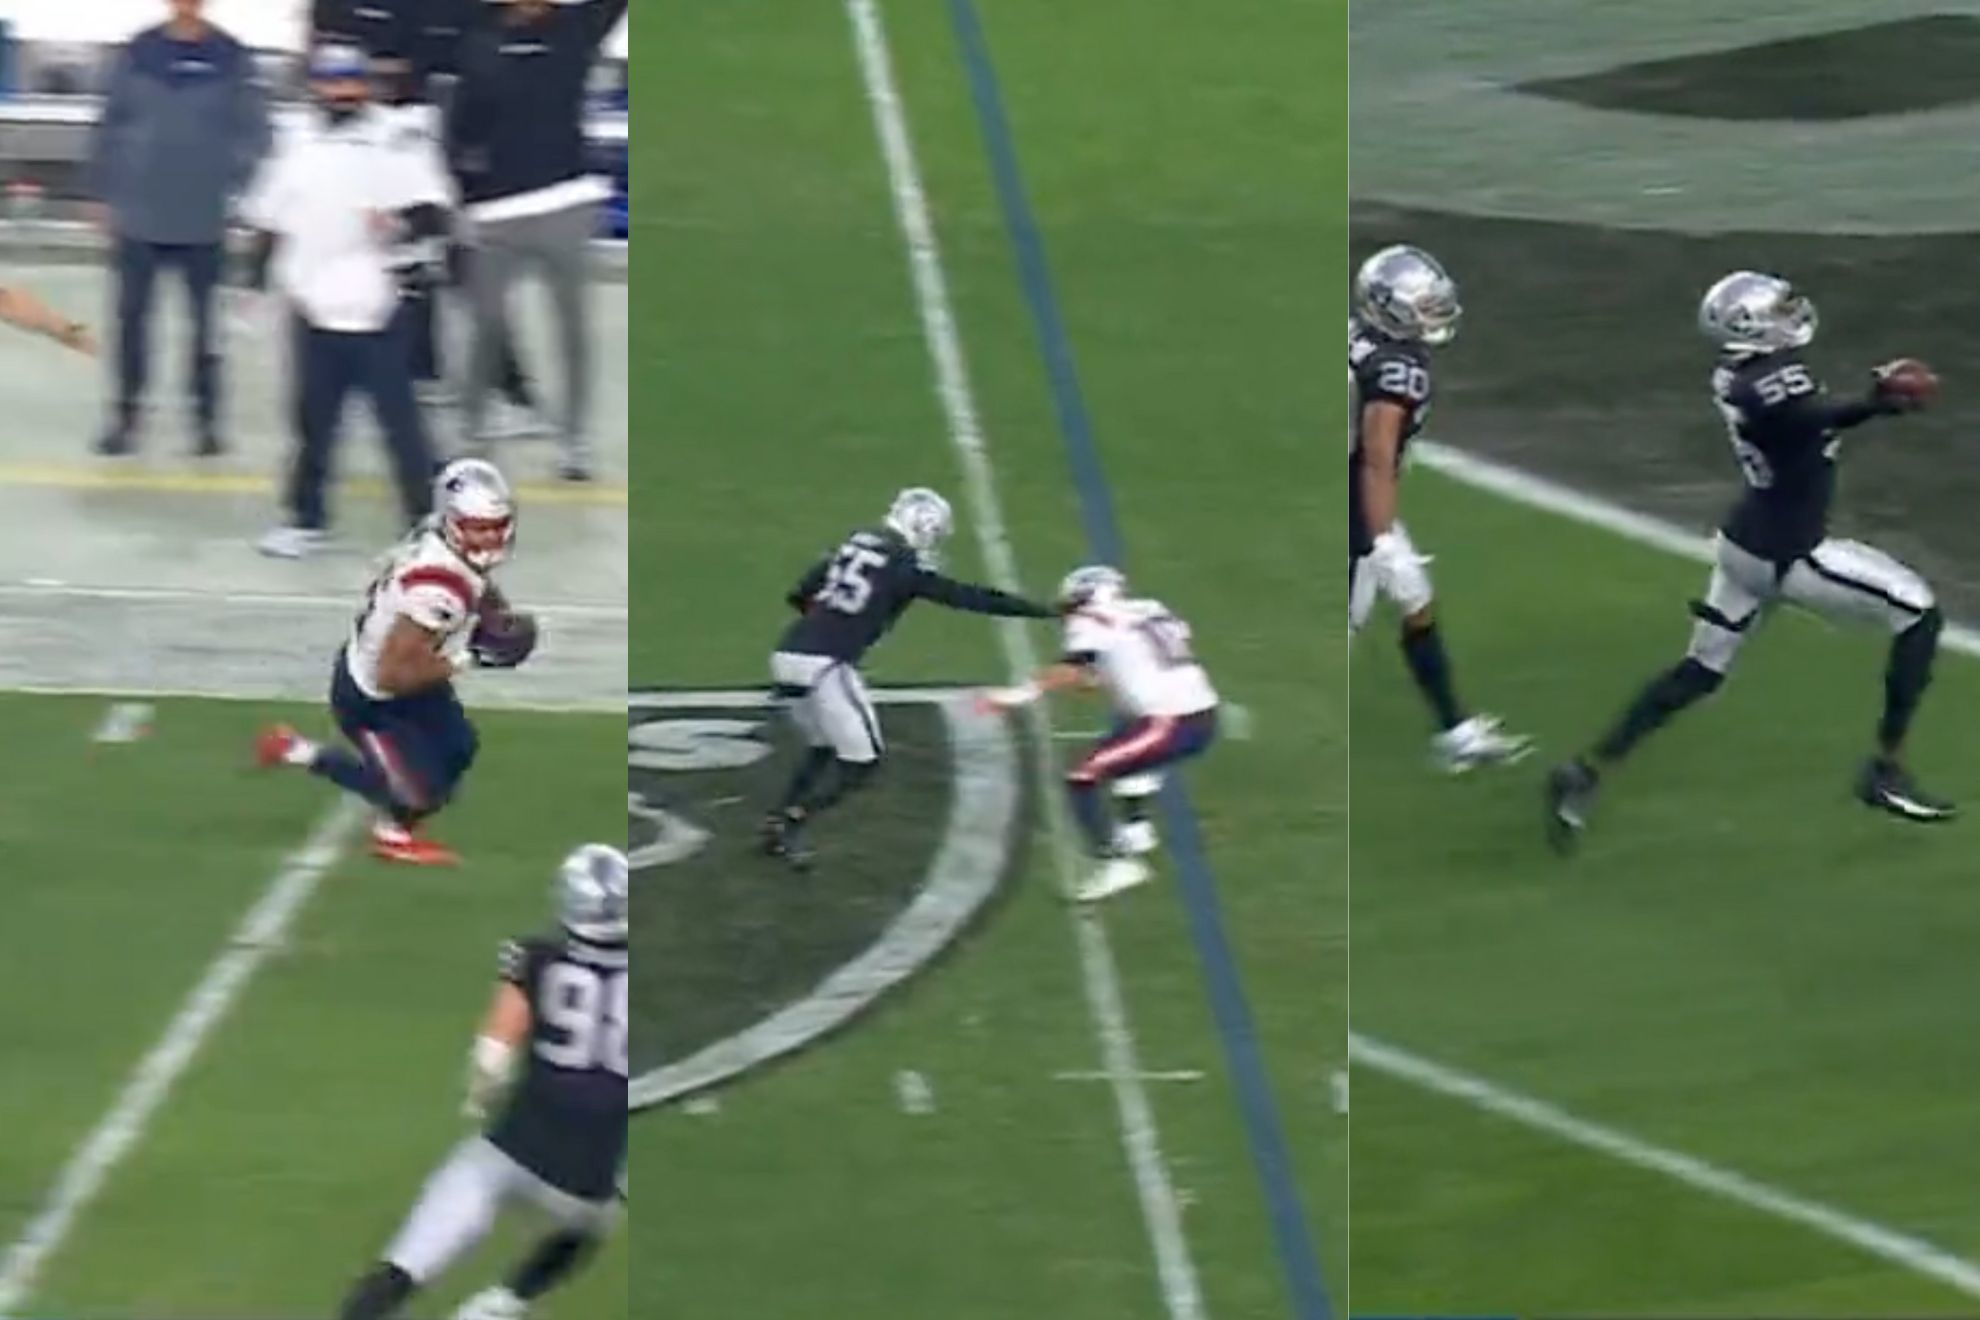 Sequence of the absurd ending in the Patriots-Raiders (24-30) game, which ended on a high-risk unnecessary set of laterals.